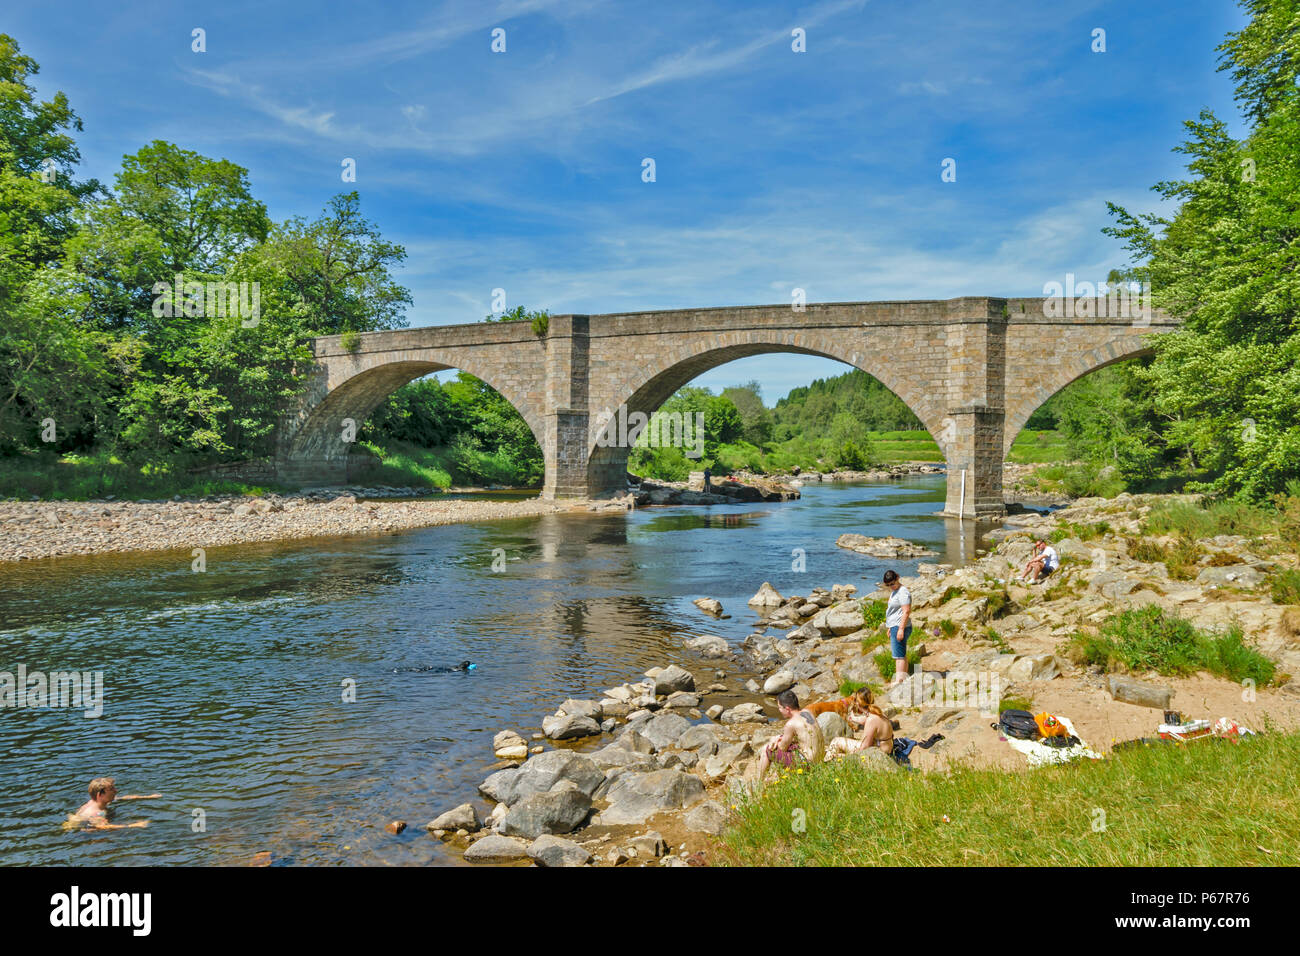 POTARCH BRIDGE OVER THE RIVER DEE ABERDEENSHIRE A VERY HOT SUMMERS DAY WITH PEOPLE AND DOGS SWIMMING AND PICNICING ON THE RIVER BANK Stock Photo